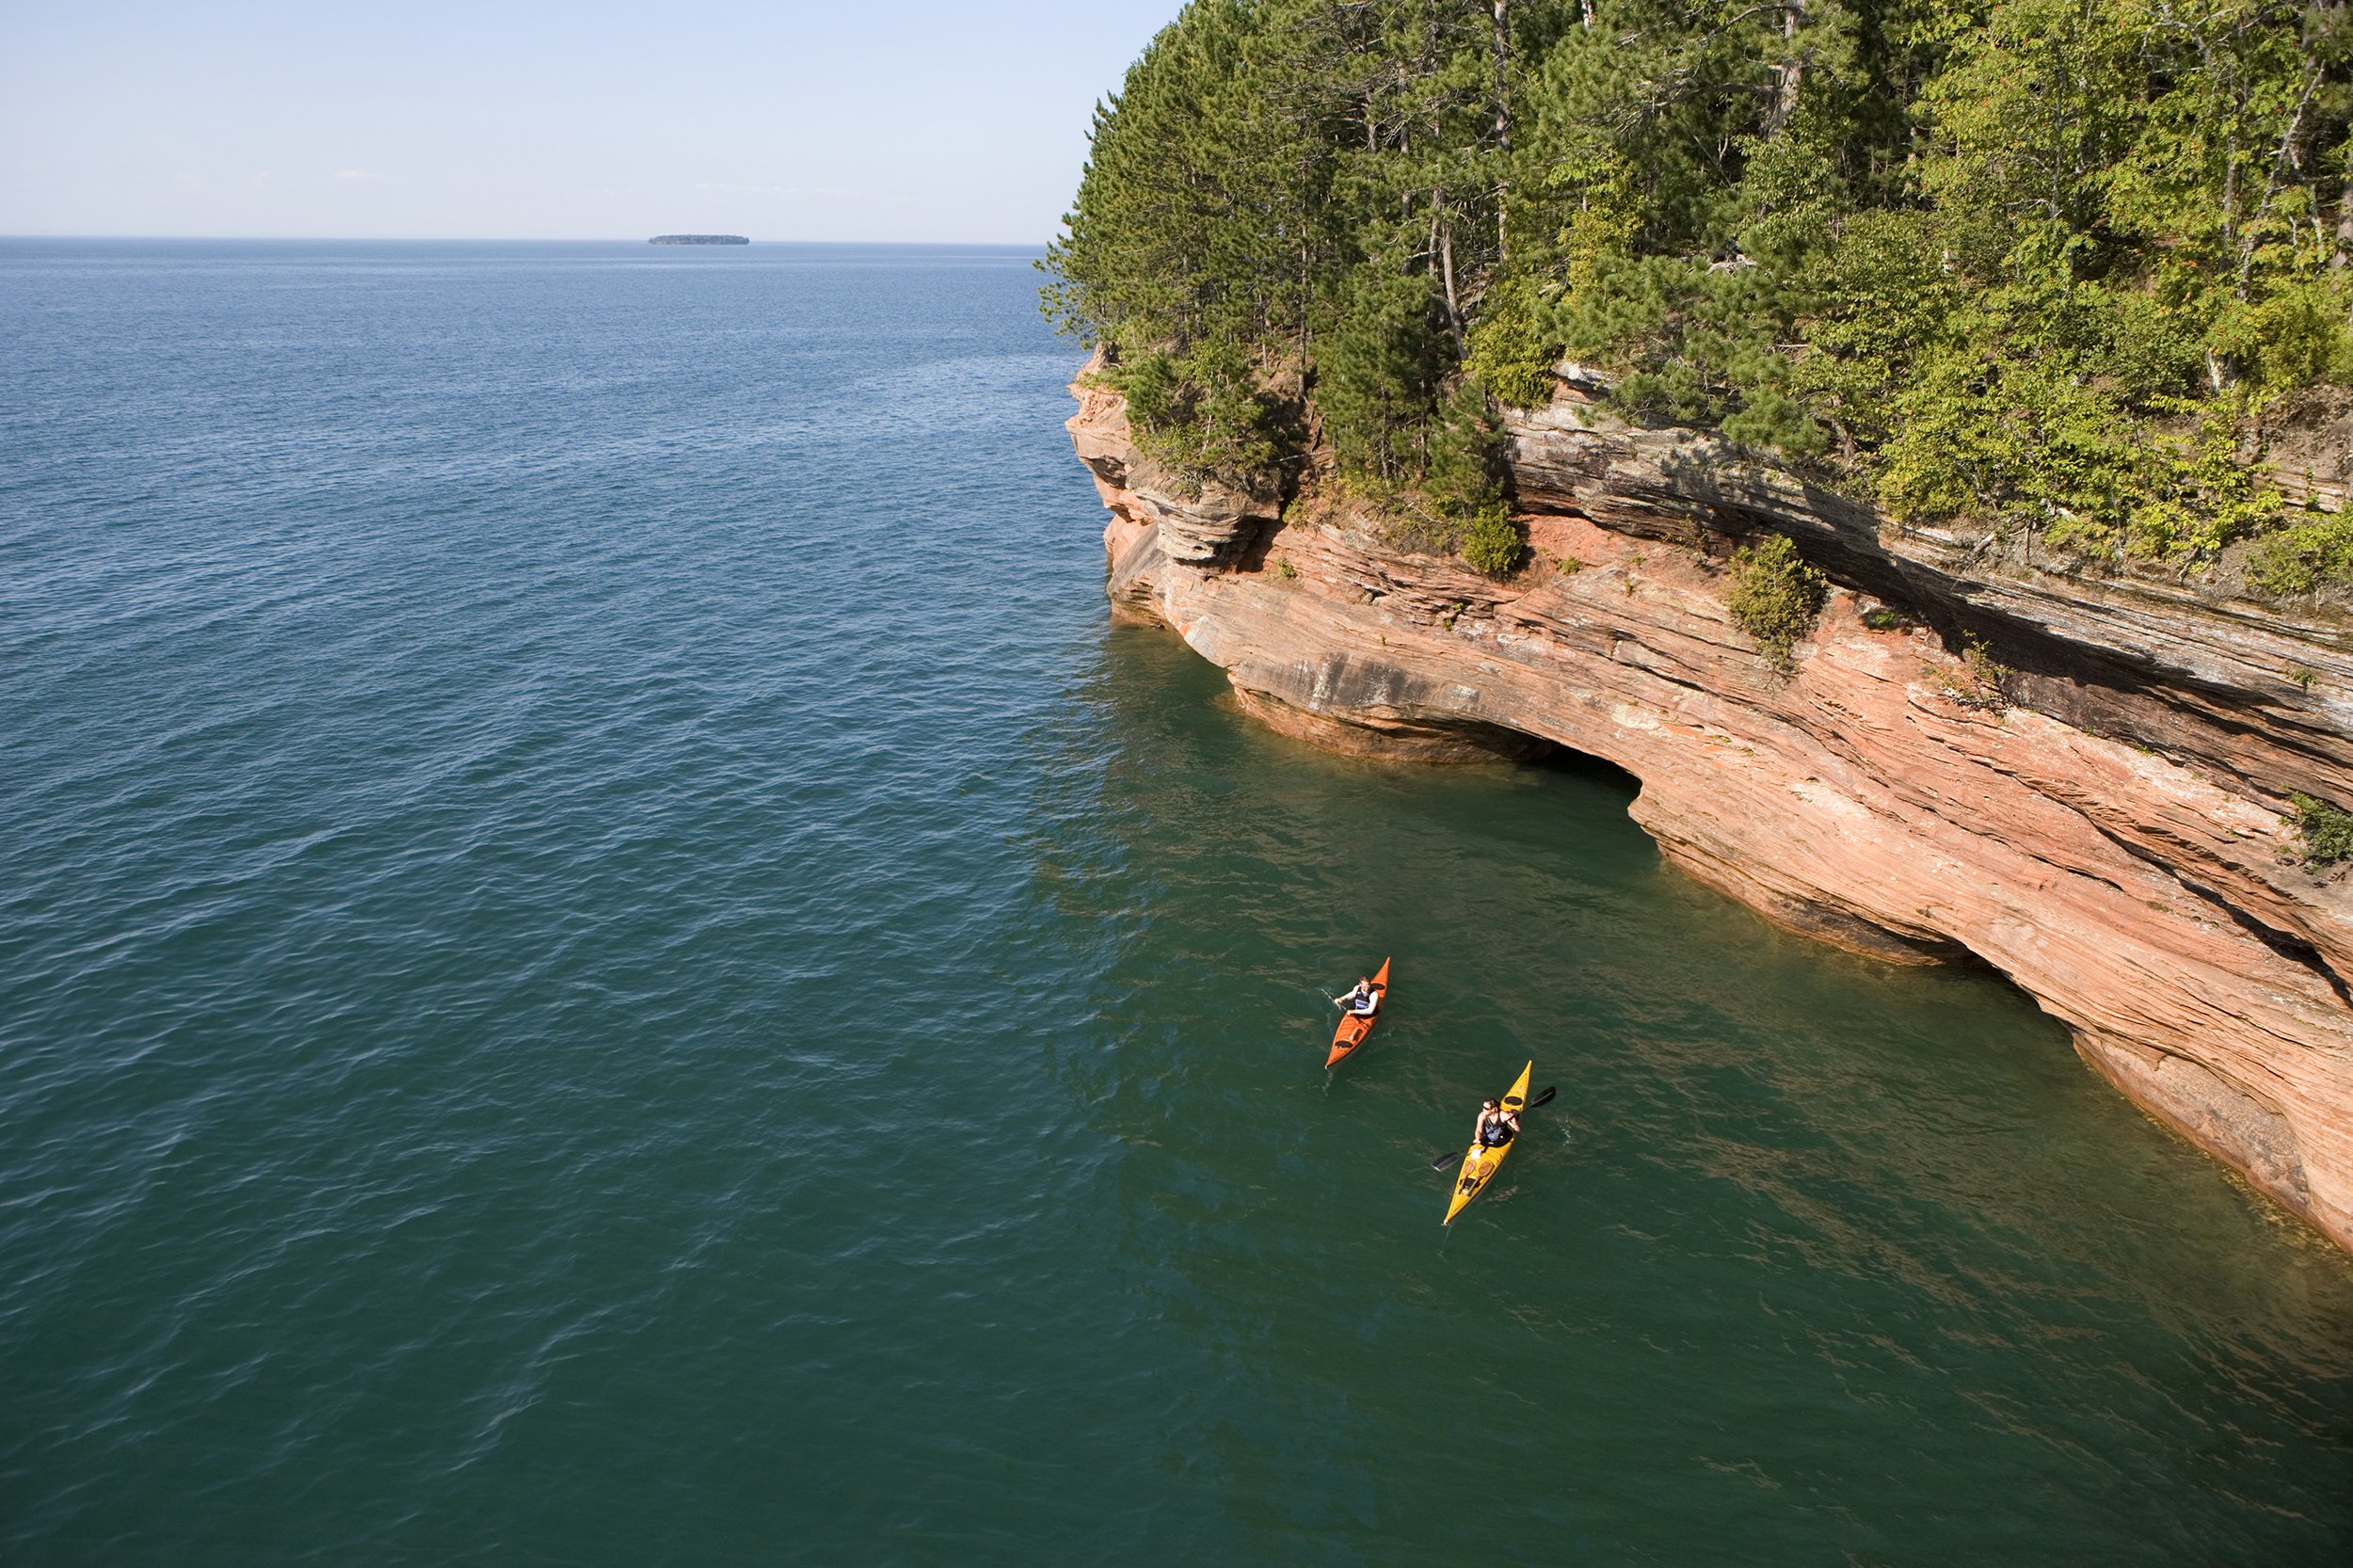 <p>Wisconsin's <a href="https://www.nps.gov/apis/index.htm">Apostle Islands National Lakeshore</a> encompasses 12 miles of mainland along Lake Superior, but many visitors enjoy heading to the reserve's 21 islands to hike and camp on windswept beaches and view historic lighthouses. To get there, take a boat or kayak or hop aboard the 140-passenger National Park Service cruiser. A $10 reservation fee is charged for camping, and individual campsite rental is $15 a night.</p>